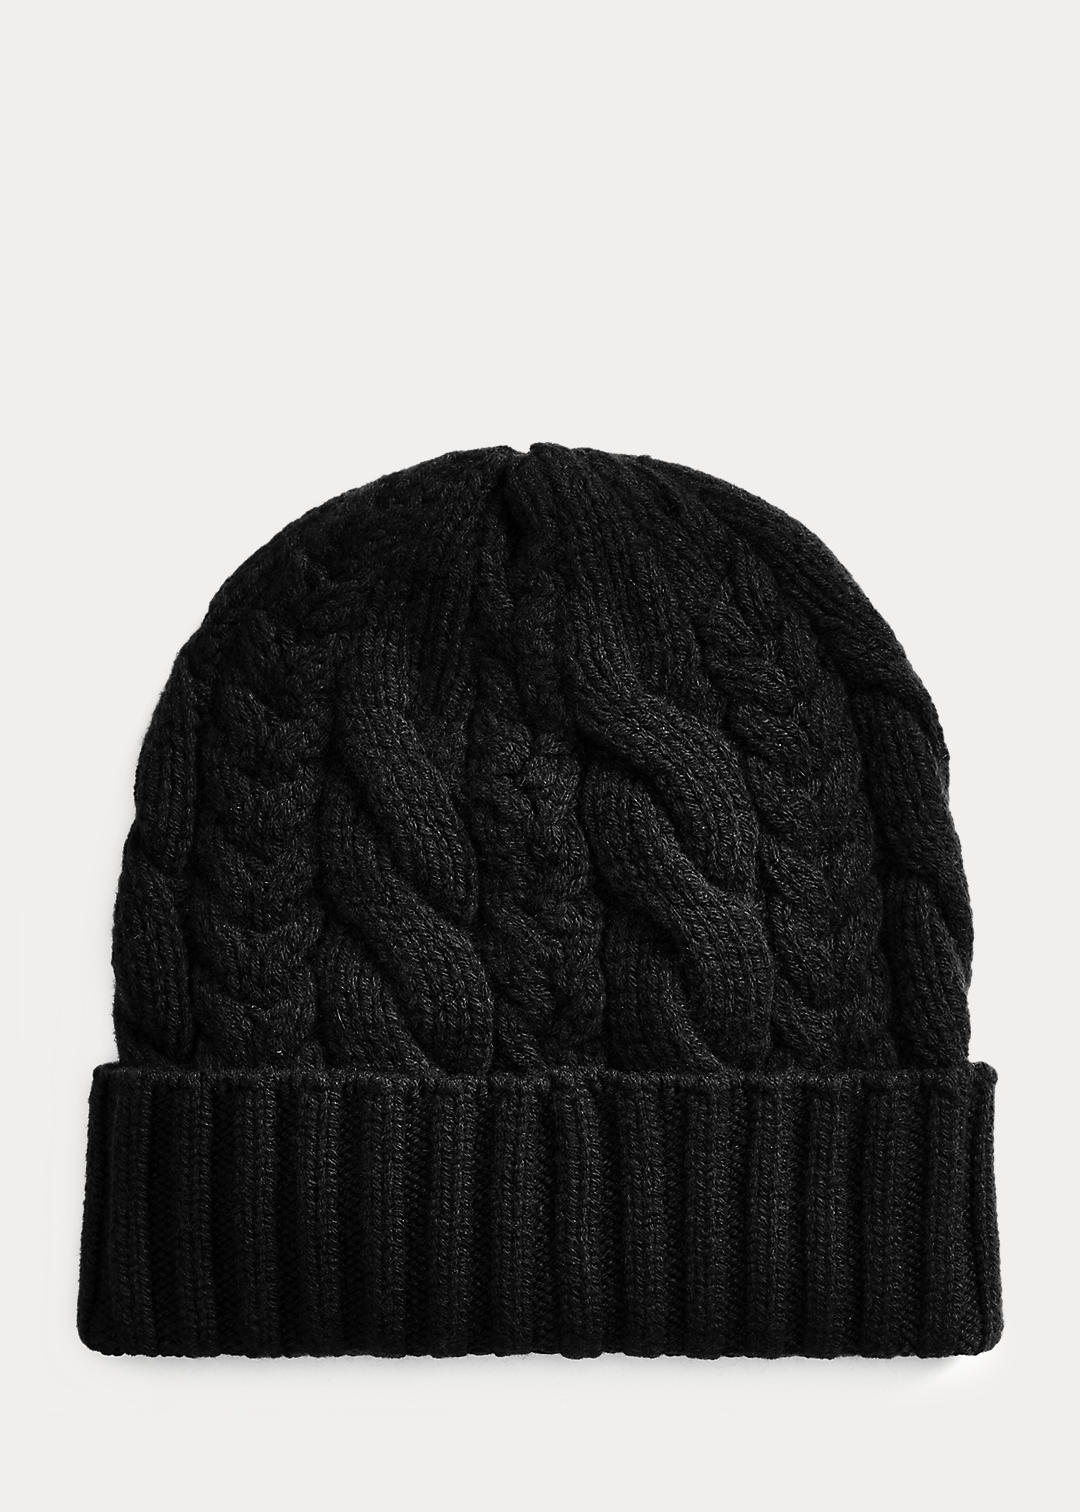 Made in England Mens Ladies 100% Cashmere Cable Ribbed Turn Up Beanie Hat Hats 